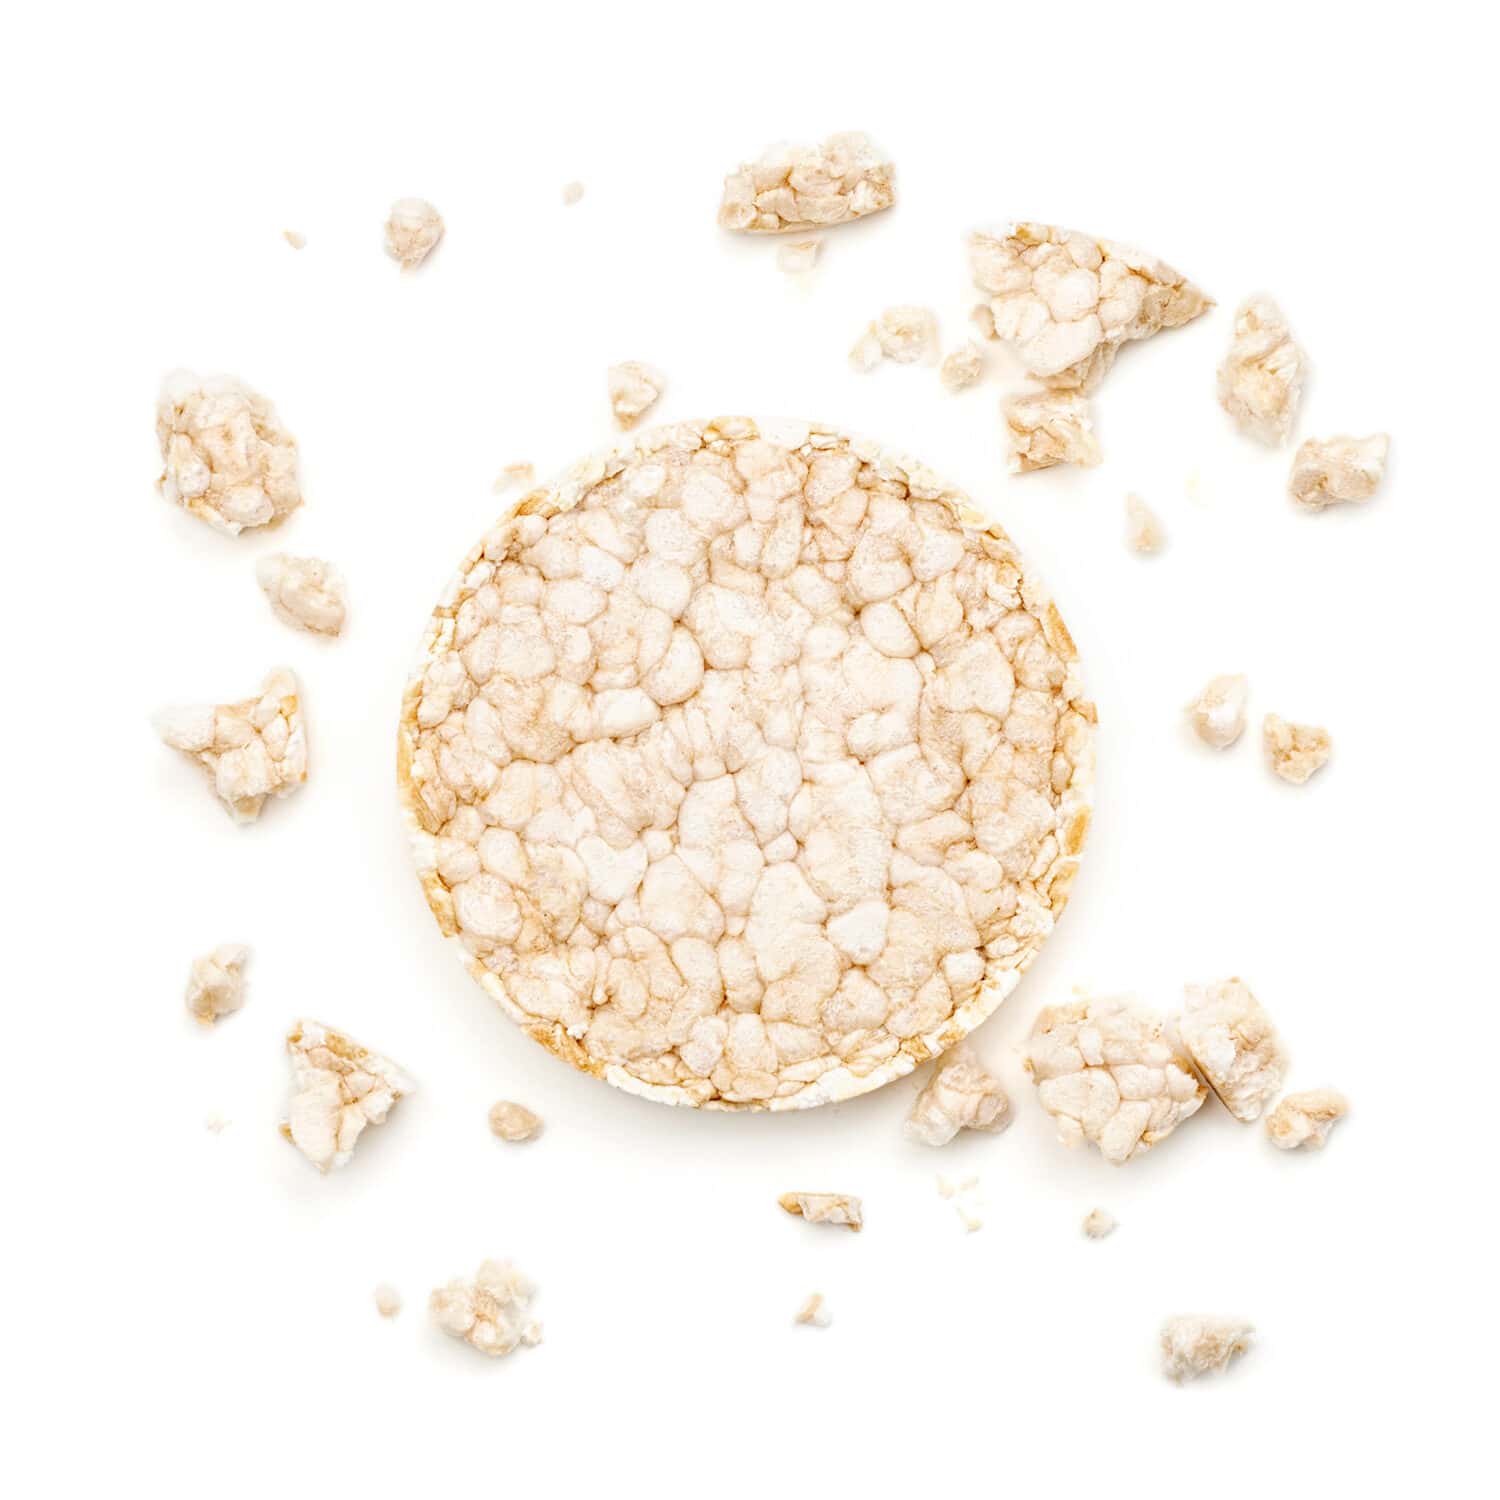 Puffed rice cake shaped in the form of a circle. Overhead close up view, isolated on white background